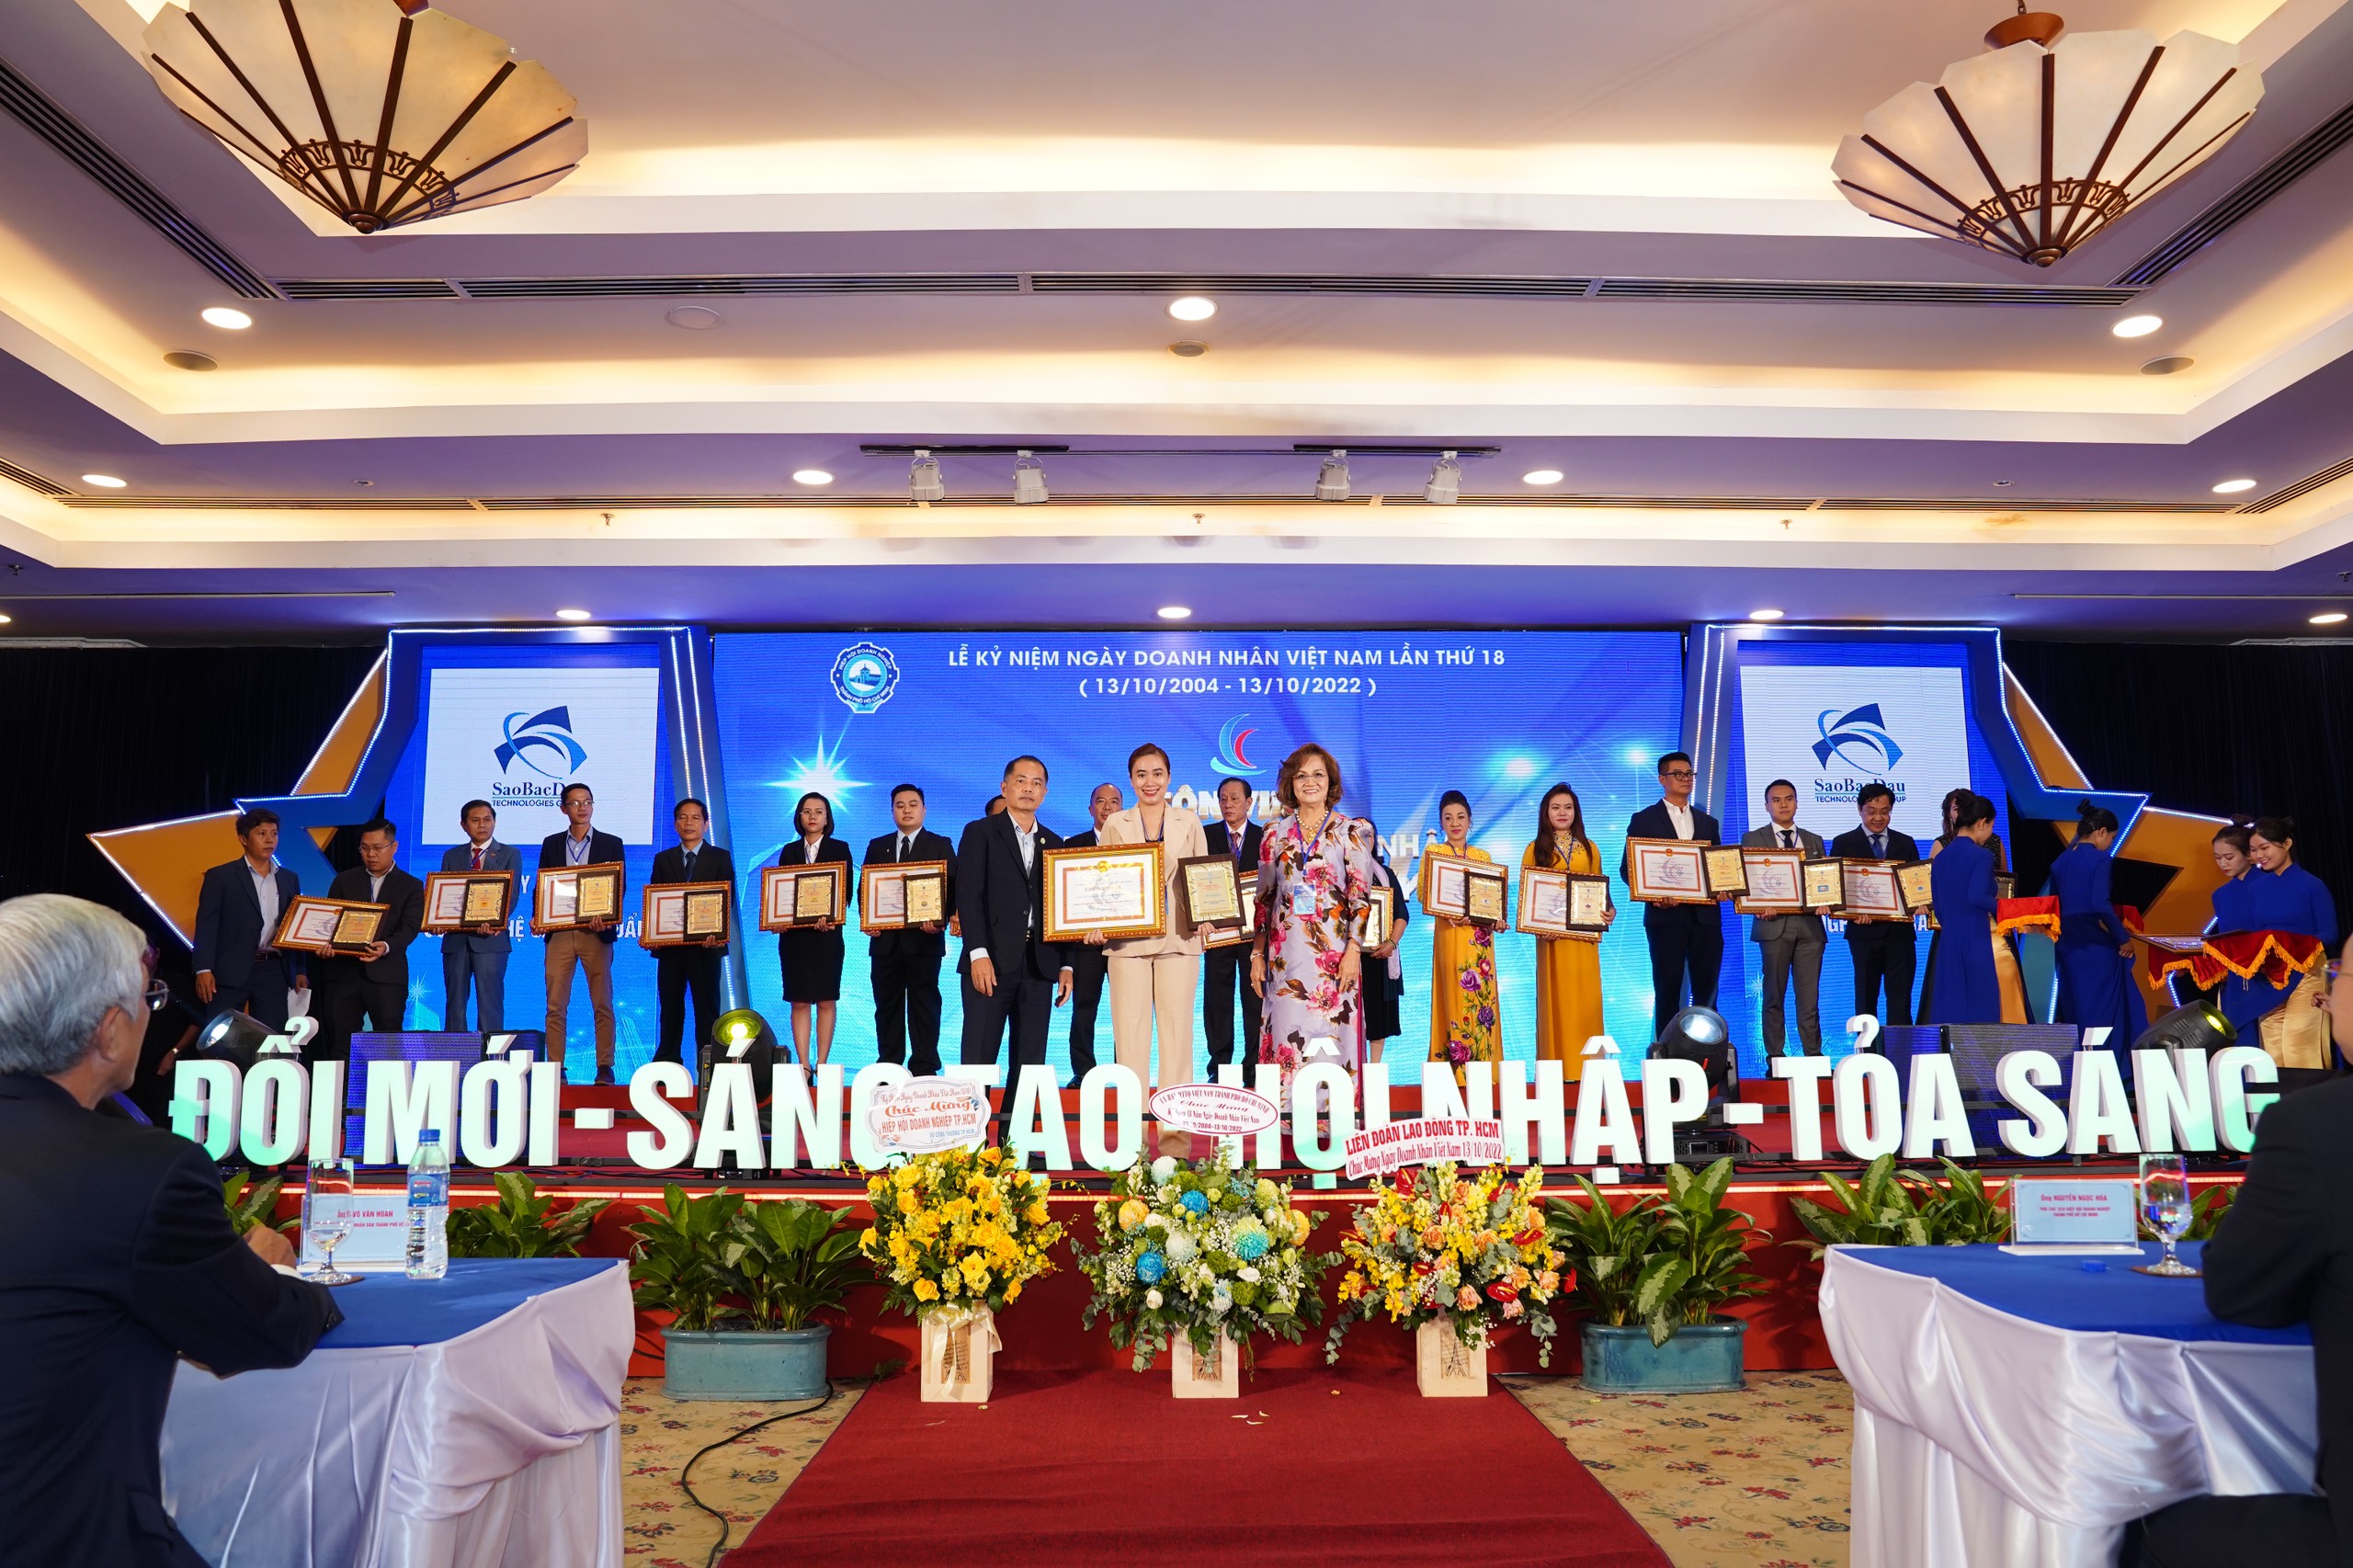 Sao Bac Dau received the title of HCMC Typical Enterprise for 3 consecutive years